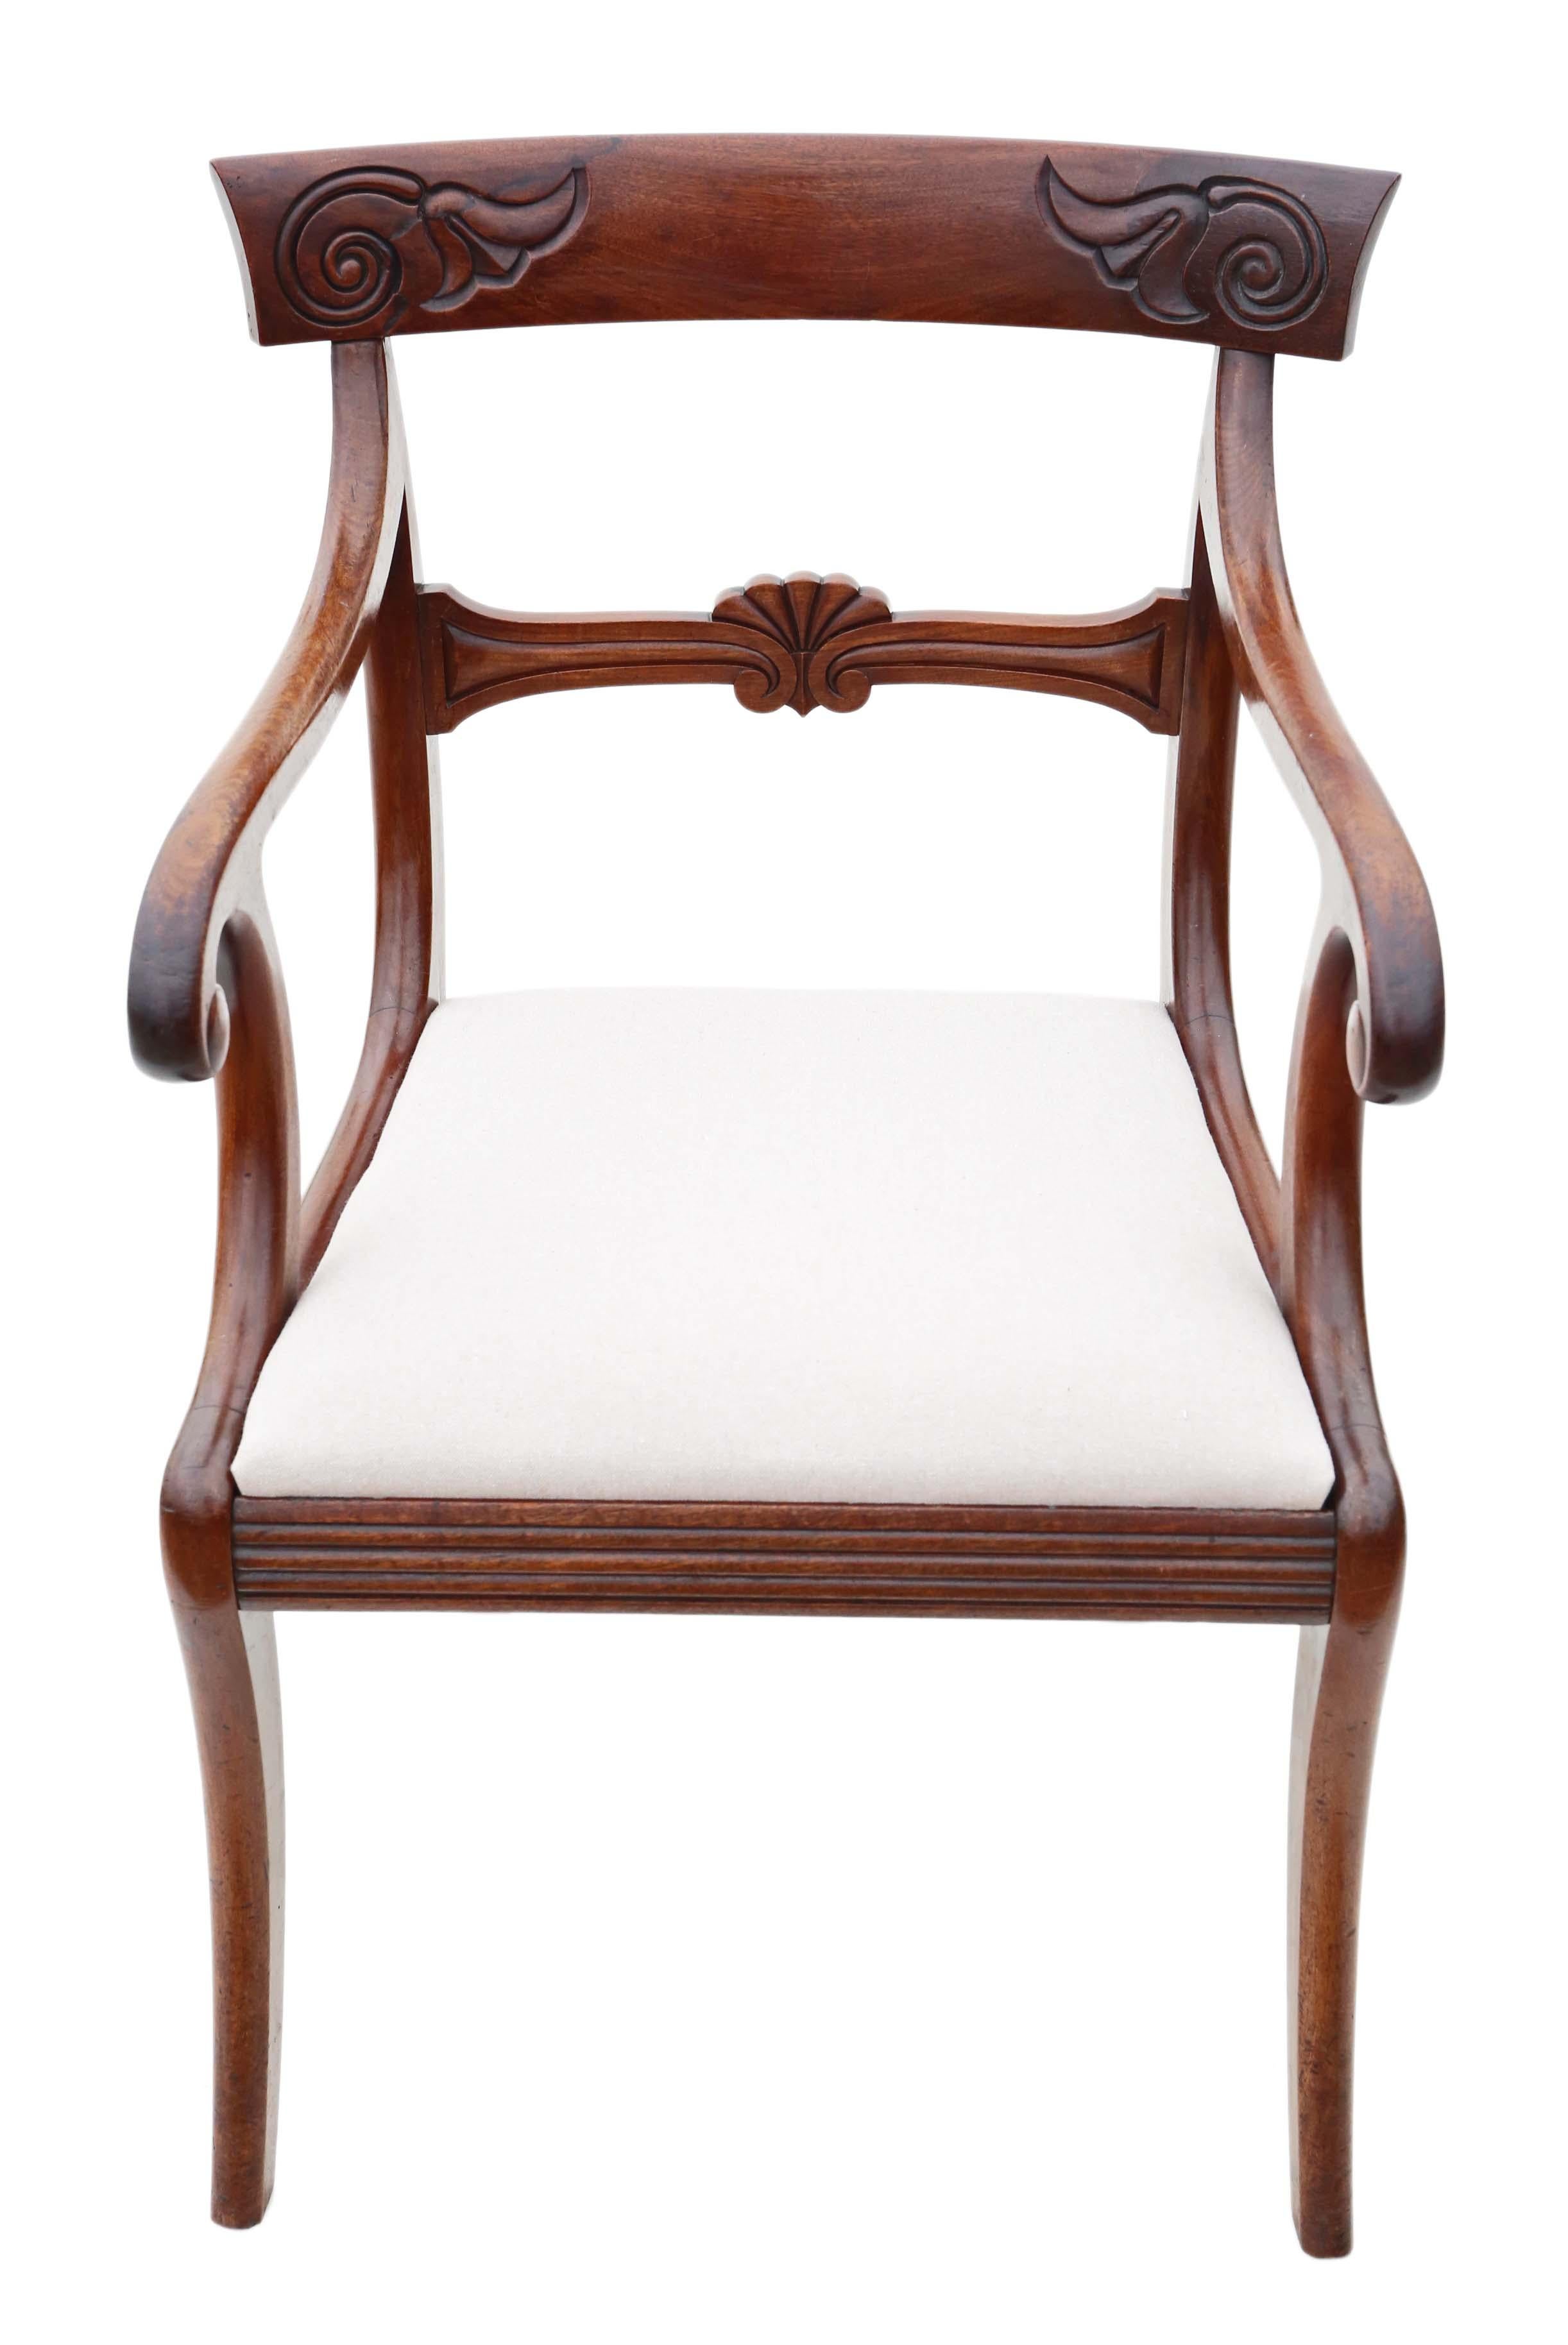 Early 19th Century Regency Cuban Mahogany Dining Chairs: Set of 6 (4+2), Antique Quality, C1825 For Sale